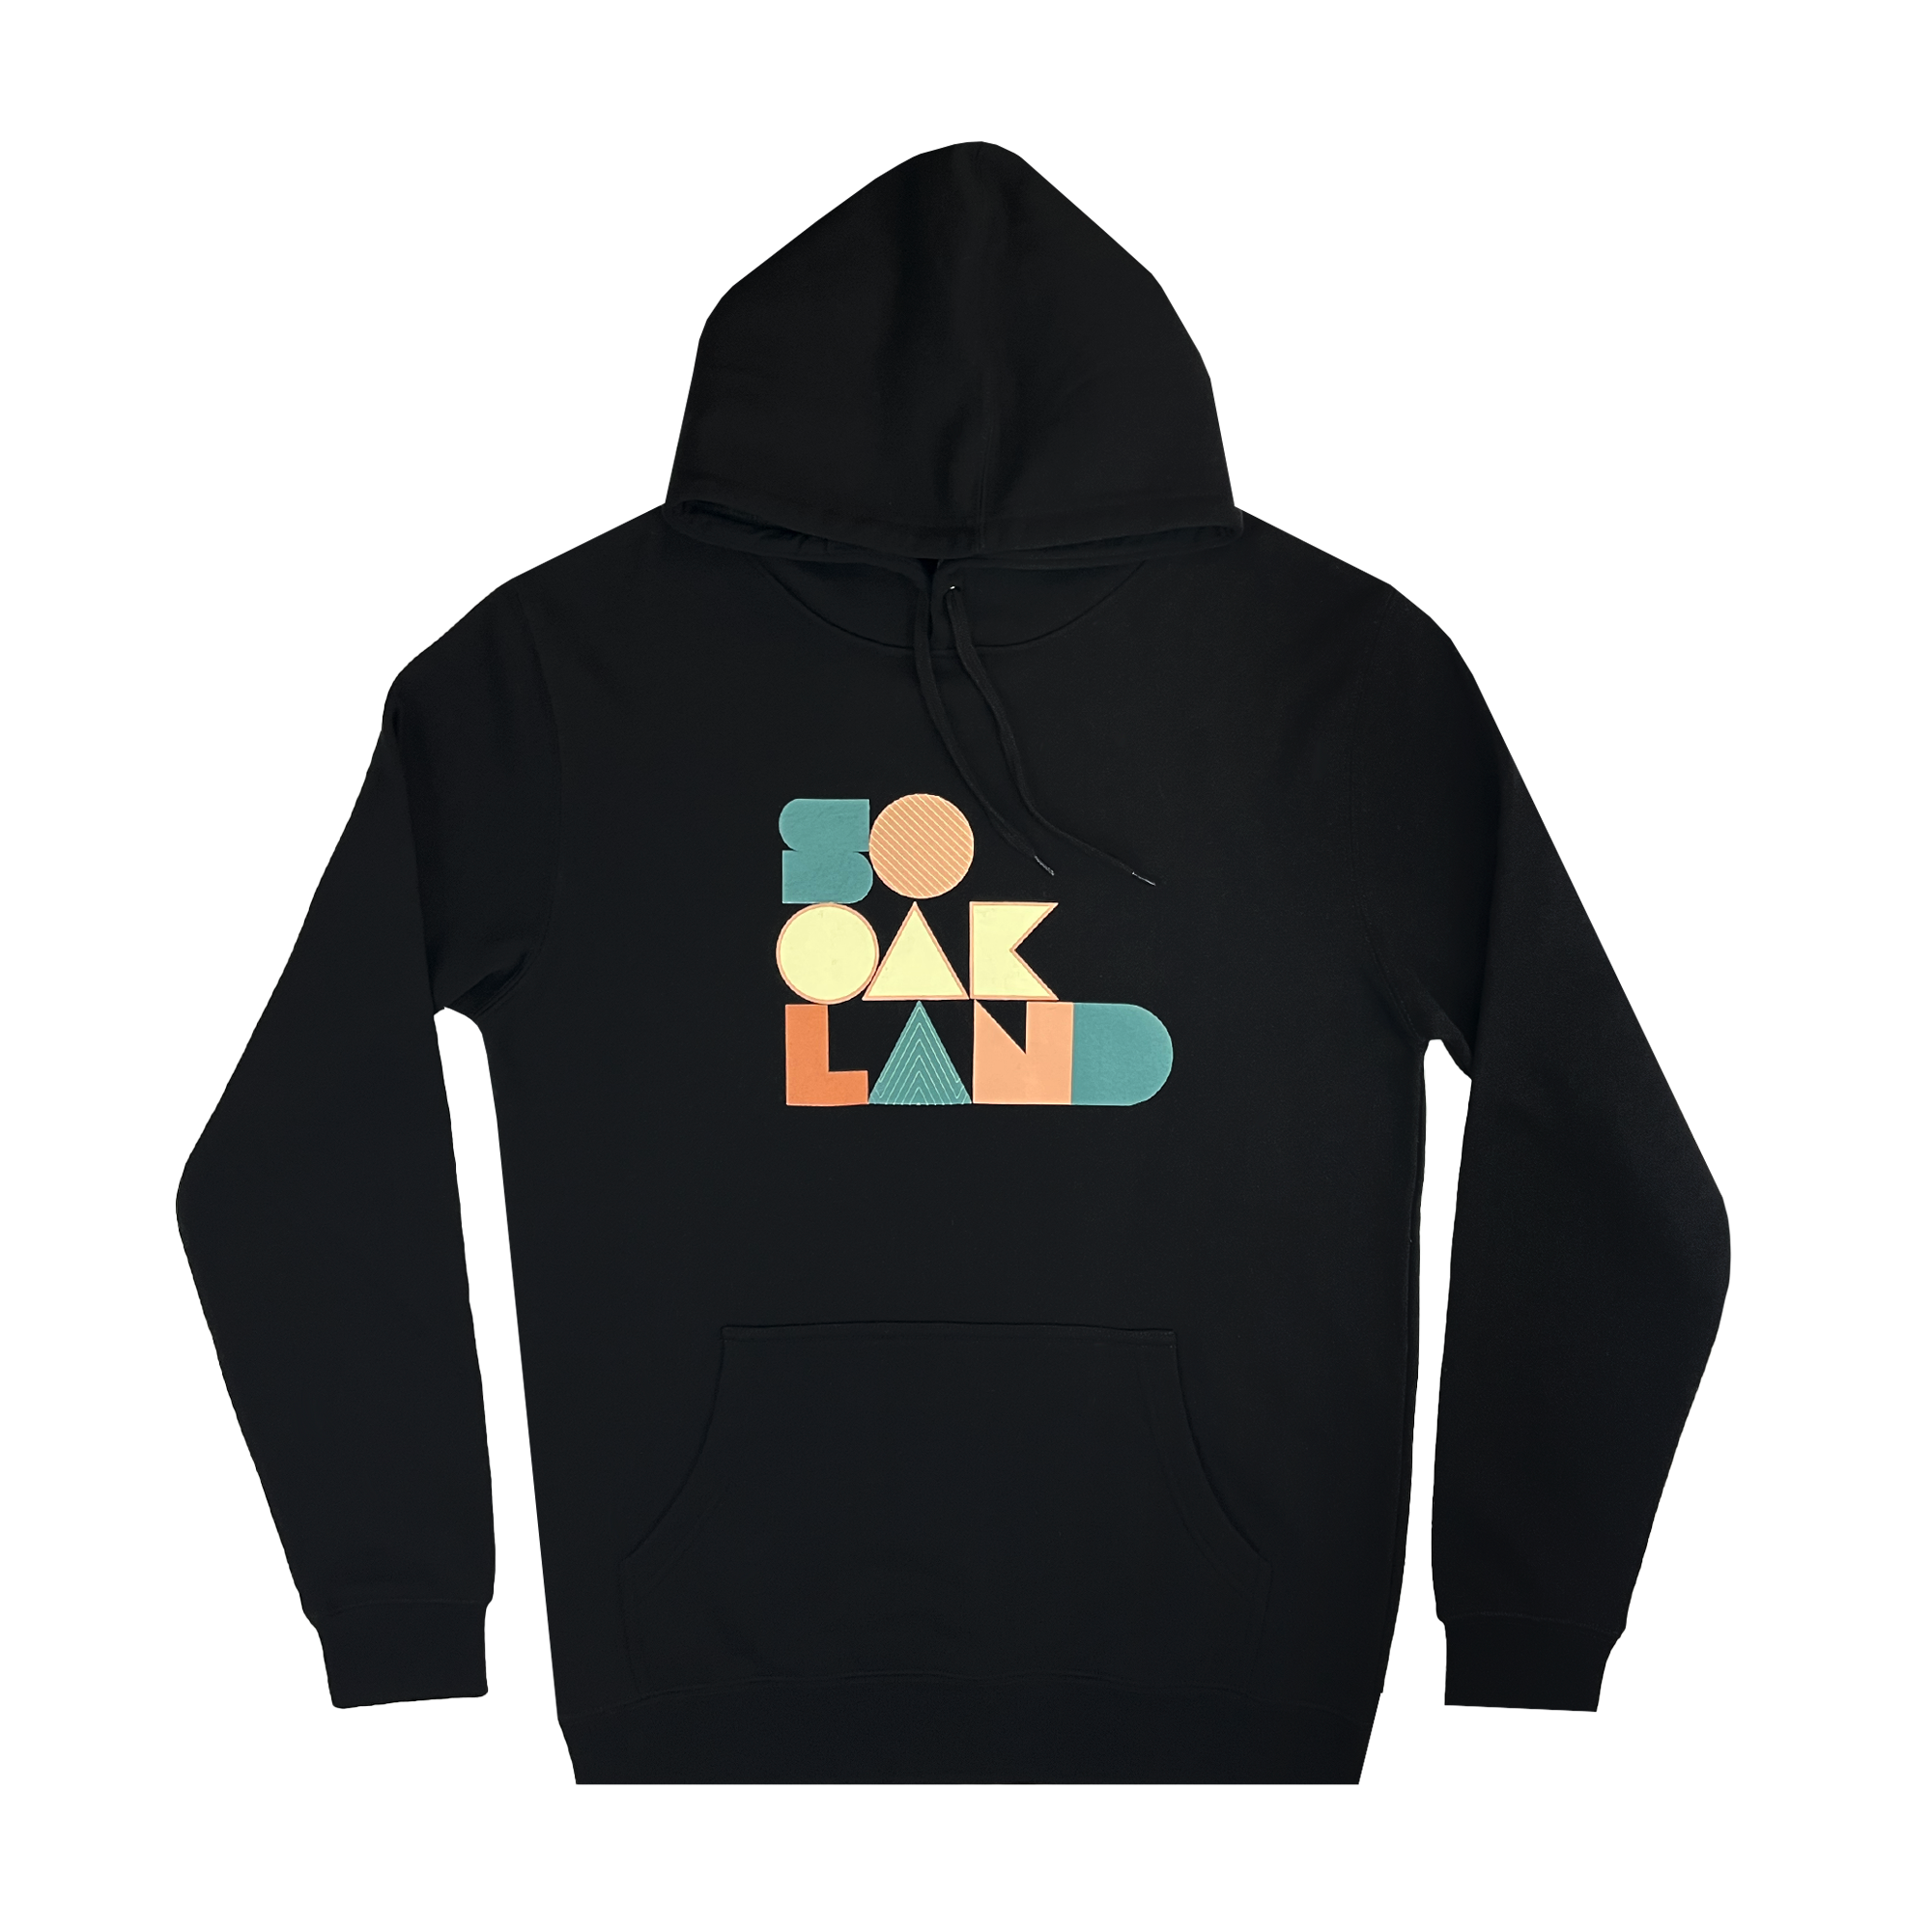 Black pullover hoodie with large multi-color SOOAKLAND graphic wordmark on the back.